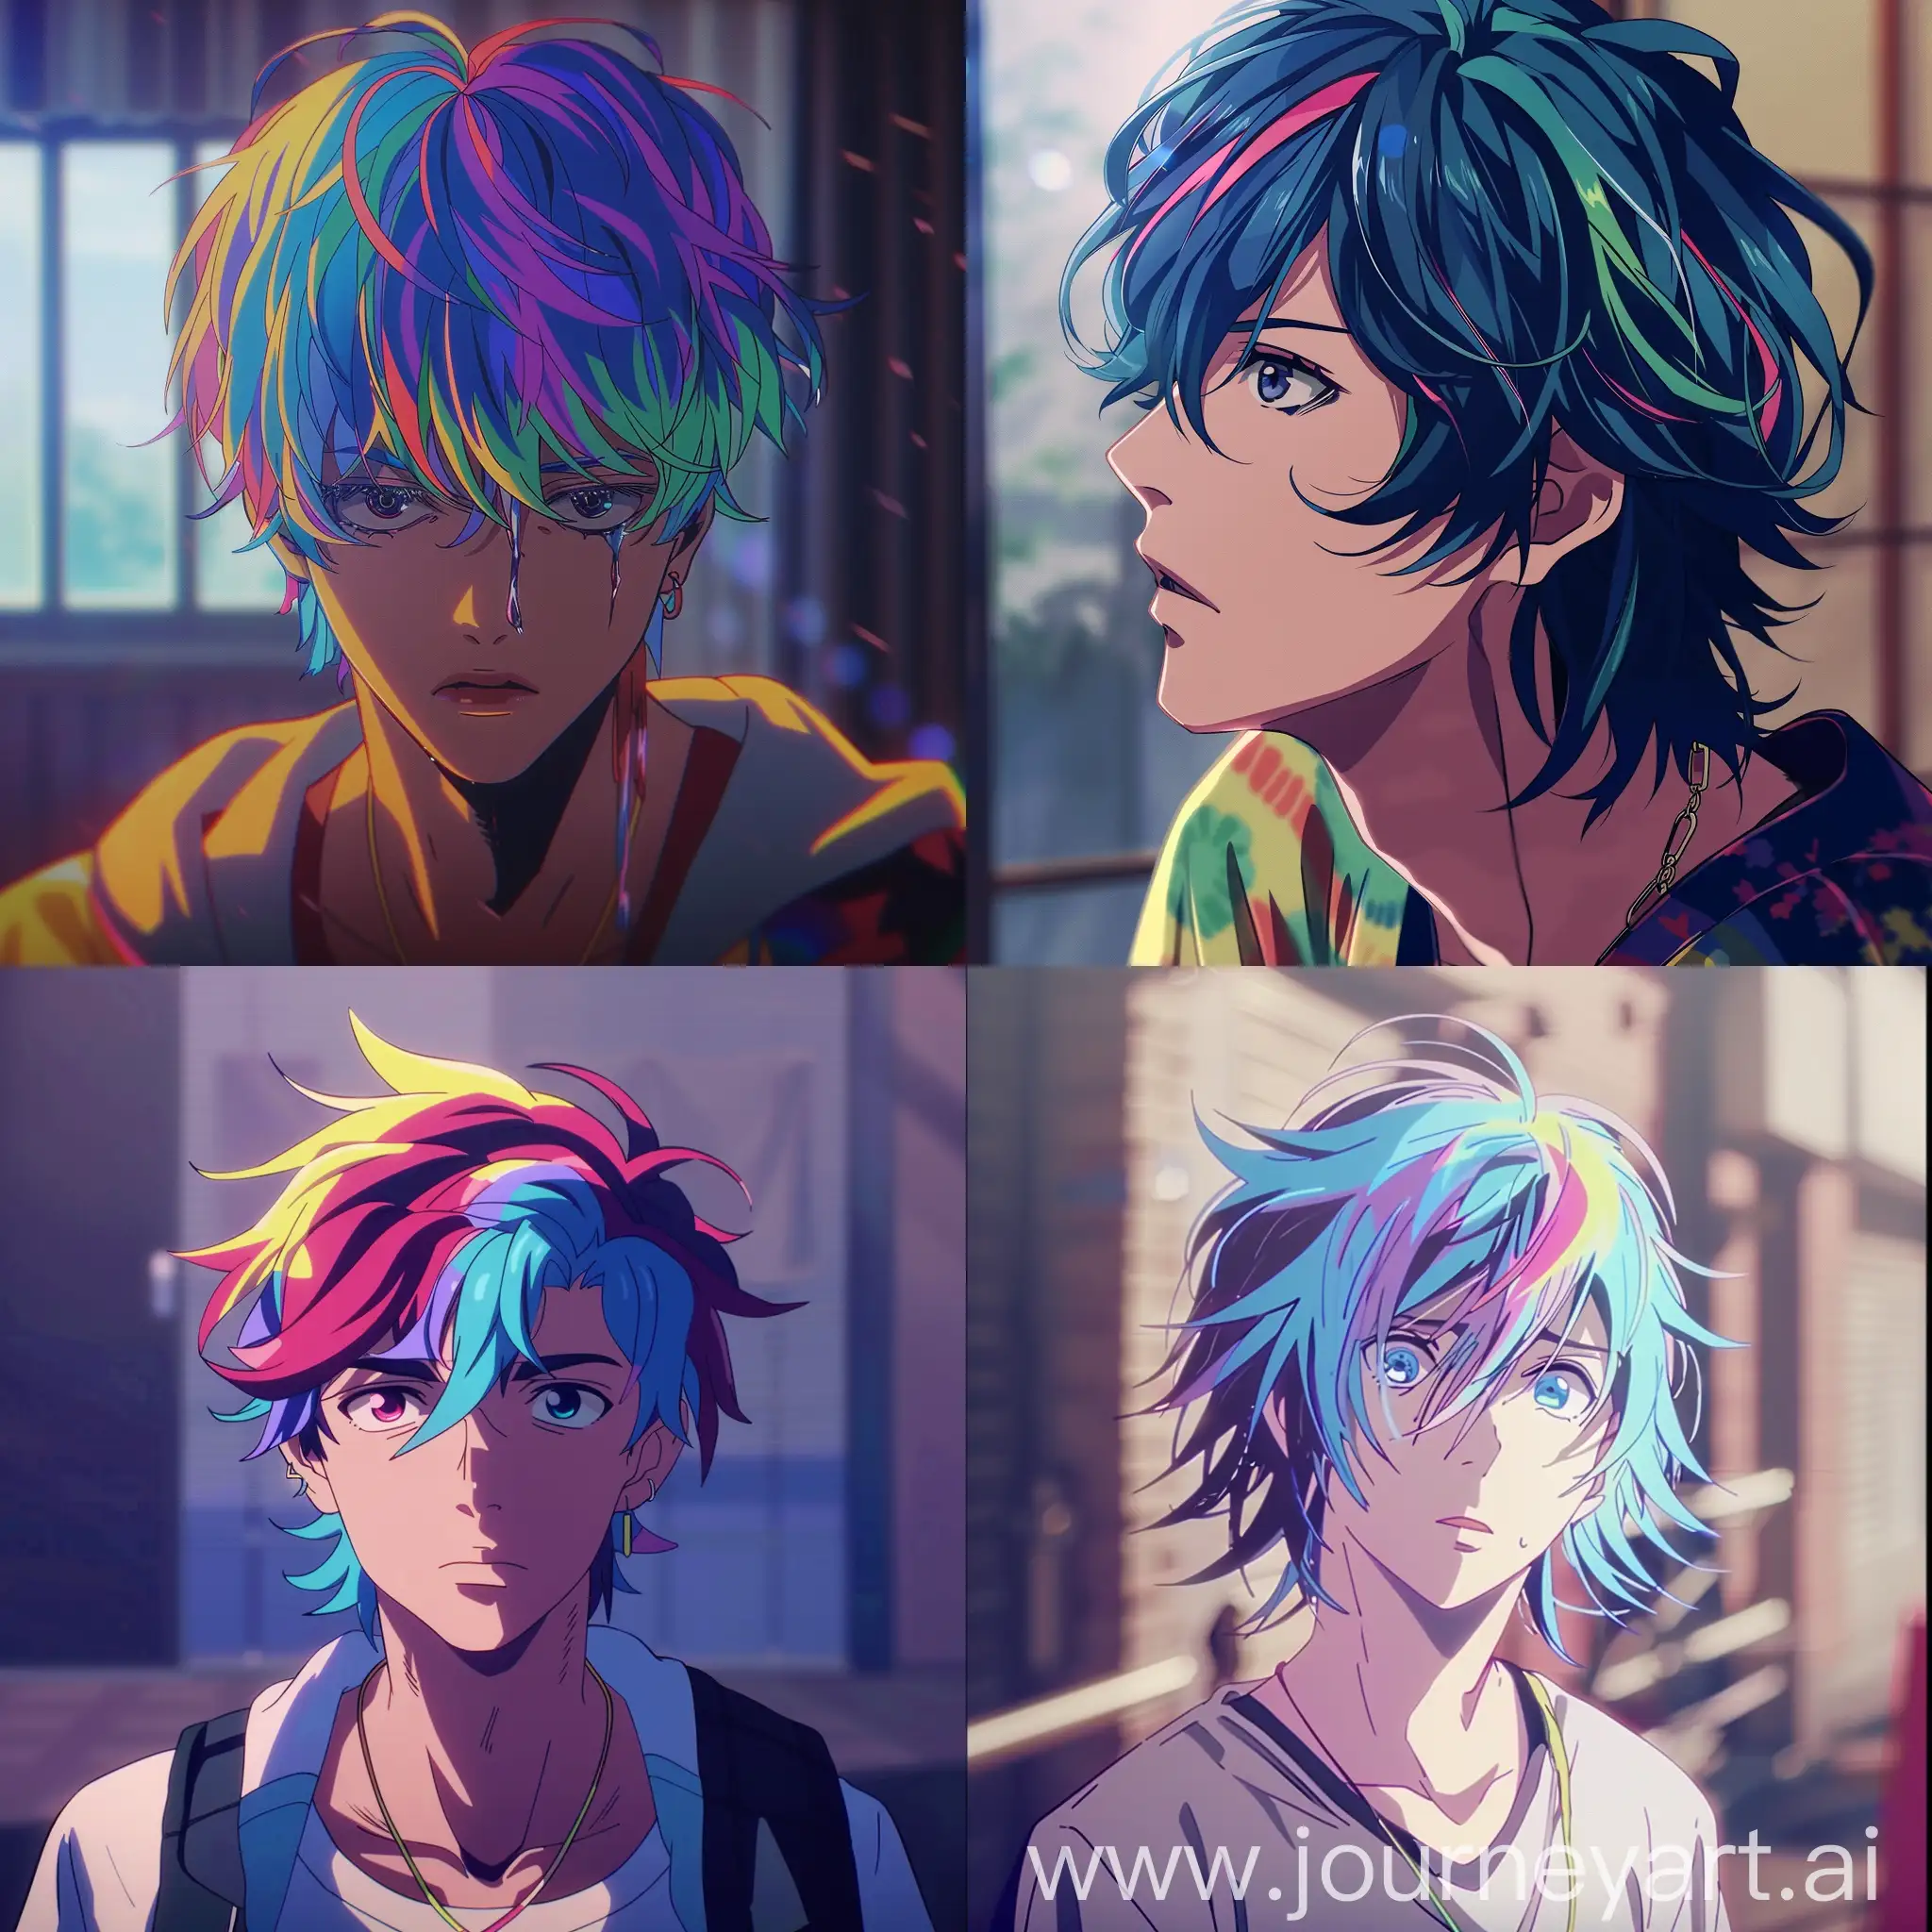 anime episode still shot, rough-edged 2d animation, anime scene, gorgeous male, handsome, unique, screenshot, colorful hair, fantasy, i can't believe how beautiful it is, anime of beautiful guys, bishounen anime, anime for girls, beautiful designs